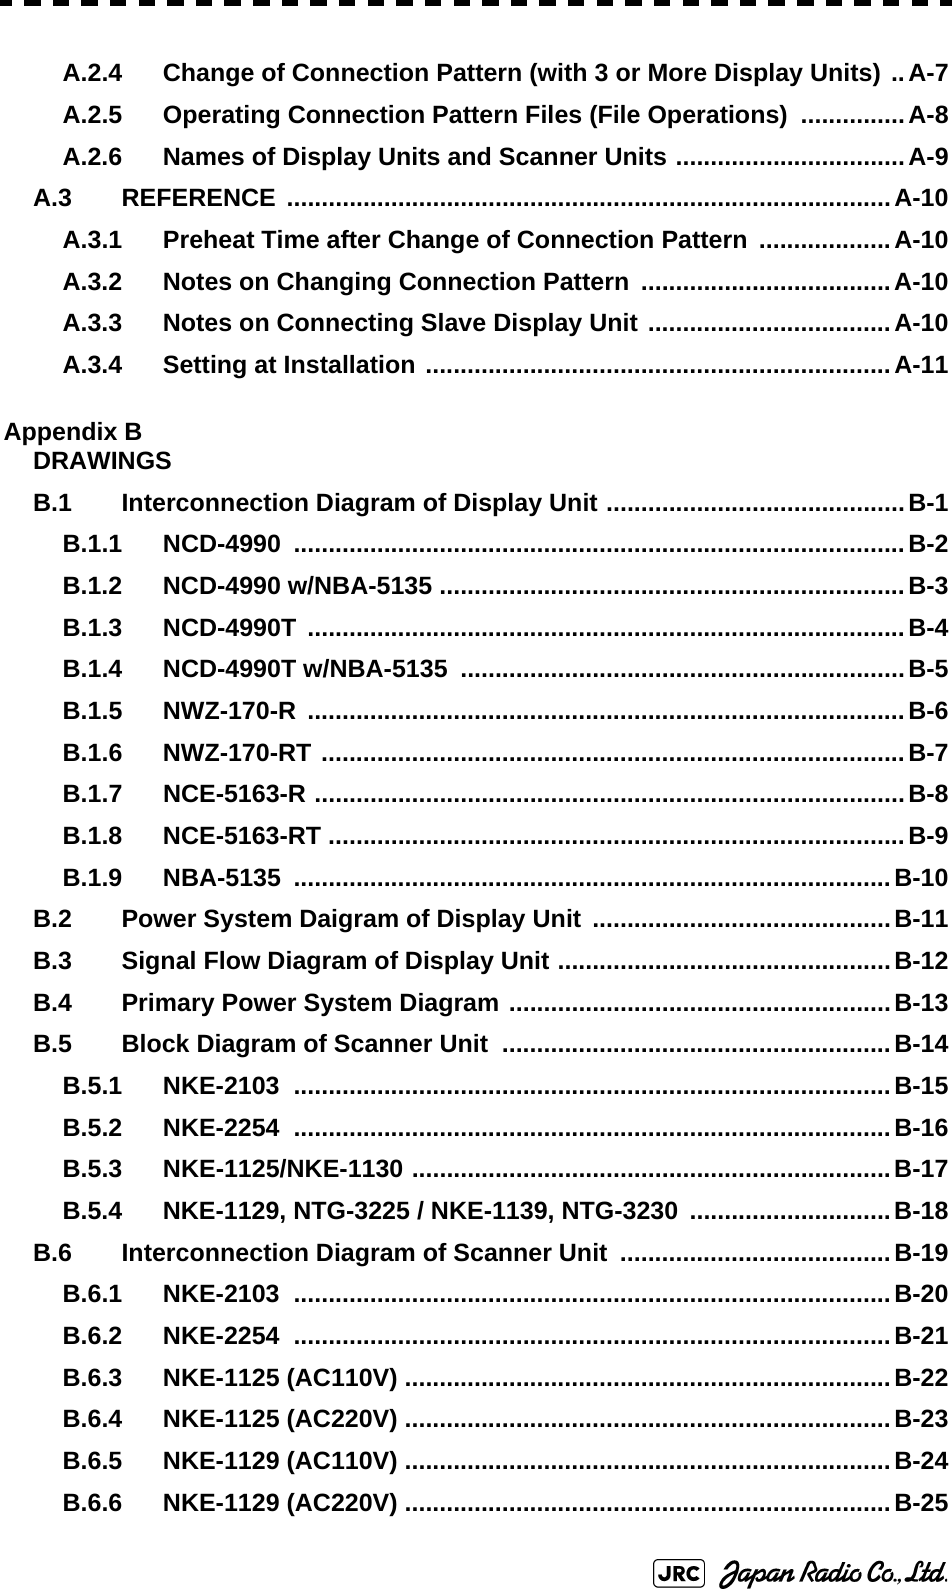 A.2.4 Change of Connection Pattern (with 3 or More Display Units) ..A-7A.2.5 Operating Connection Pattern Files (File Operations)  ...............A-8A.2.6 Names of Display Units and Scanner Units .................................A-9A.3 REFERENCE .......................................................................................A-10A.3.1 Preheat Time after Change of Connection Pattern  ...................A-10A.3.2 Notes on Changing Connection Pattern ....................................A-10A.3.3 Notes on Connecting Slave Display Unit ...................................A-10A.3.4 Setting at Installation ...................................................................A-11Appendix BDRAWINGSB.1 Interconnection Diagram of Display Unit ...........................................B-1B.1.1 NCD-4990 ........................................................................................B-2B.1.2 NCD-4990 w/NBA-5135 ...................................................................B-3B.1.3 NCD-4990T ......................................................................................B-4B.1.4 NCD-4990T w/NBA-5135  ................................................................B-5B.1.5 NWZ-170-R ......................................................................................B-6B.1.6 NWZ-170-RT ....................................................................................B-7B.1.7 NCE-5163-R .....................................................................................B-8B.1.8 NCE-5163-RT ...................................................................................B-9B.1.9 NBA-5135 ......................................................................................B-10B.2 Power System Daigram of Display Unit  ...........................................B-11B.3 Signal Flow Diagram of Display Unit ................................................B-12B.4 Primary Power System Diagram .......................................................B-13B.5 Block Diagram of Scanner Unit ........................................................B-14B.5.1 NKE-2103 ......................................................................................B-15B.5.2 NKE-2254 ......................................................................................B-16B.5.3 NKE-1125/NKE-1130 .....................................................................B-17B.5.4 NKE-1129, NTG-3225 / NKE-1139, NTG-3230  .............................B-18B.6 Interconnection Diagram of Scanner Unit  .......................................B-19B.6.1 NKE-2103 ......................................................................................B-20B.6.2 NKE-2254 ......................................................................................B-21B.6.3 NKE-1125 (AC110V) ......................................................................B-22B.6.4 NKE-1125 (AC220V) ......................................................................B-23B.6.5 NKE-1129 (AC110V) ......................................................................B-24B.6.6 NKE-1129 (AC220V) ......................................................................B-25